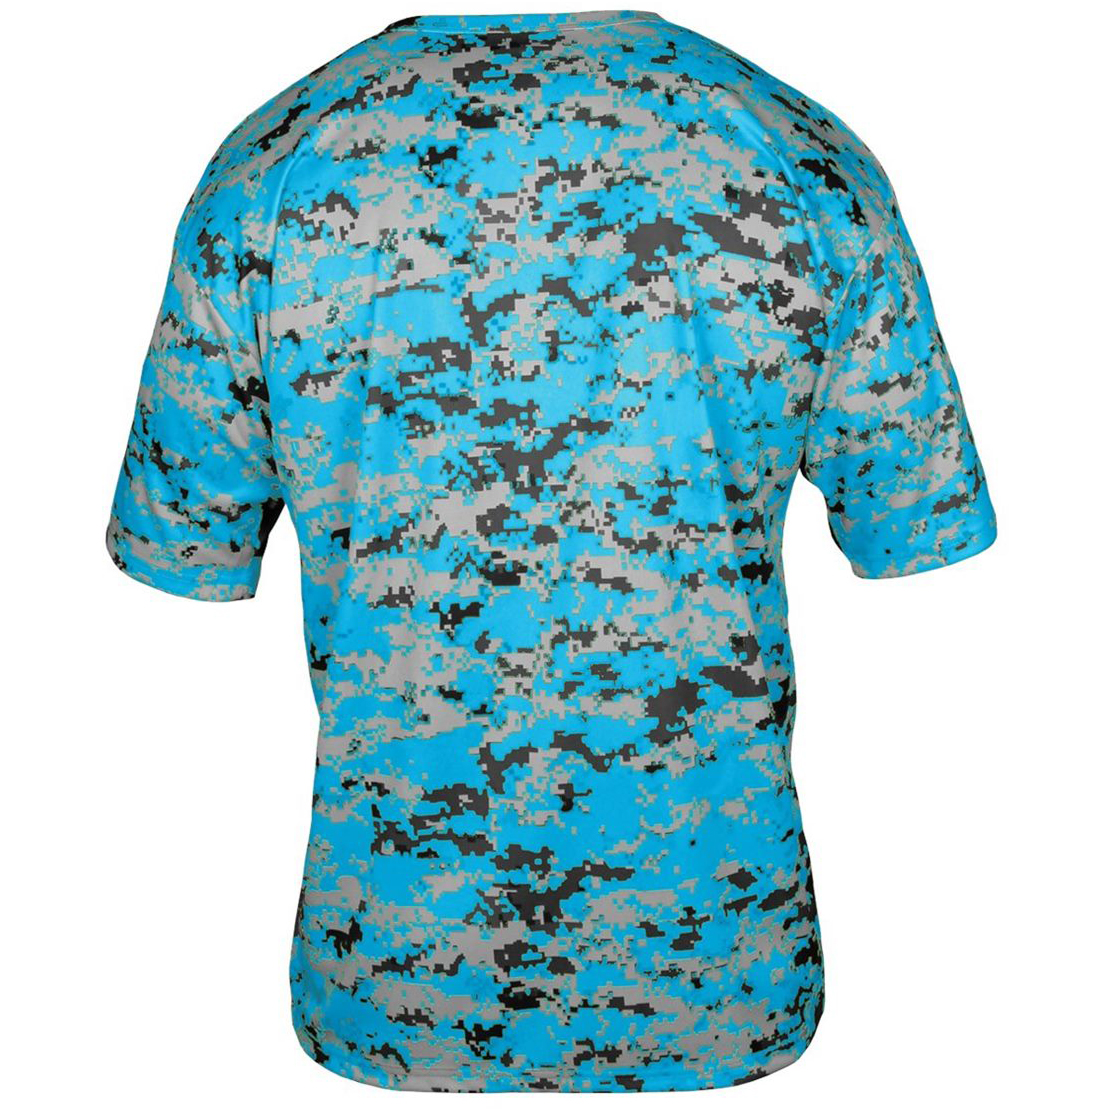 Digital Camo Performance B-Core Shirt by Badger Sports Style Number: 4180